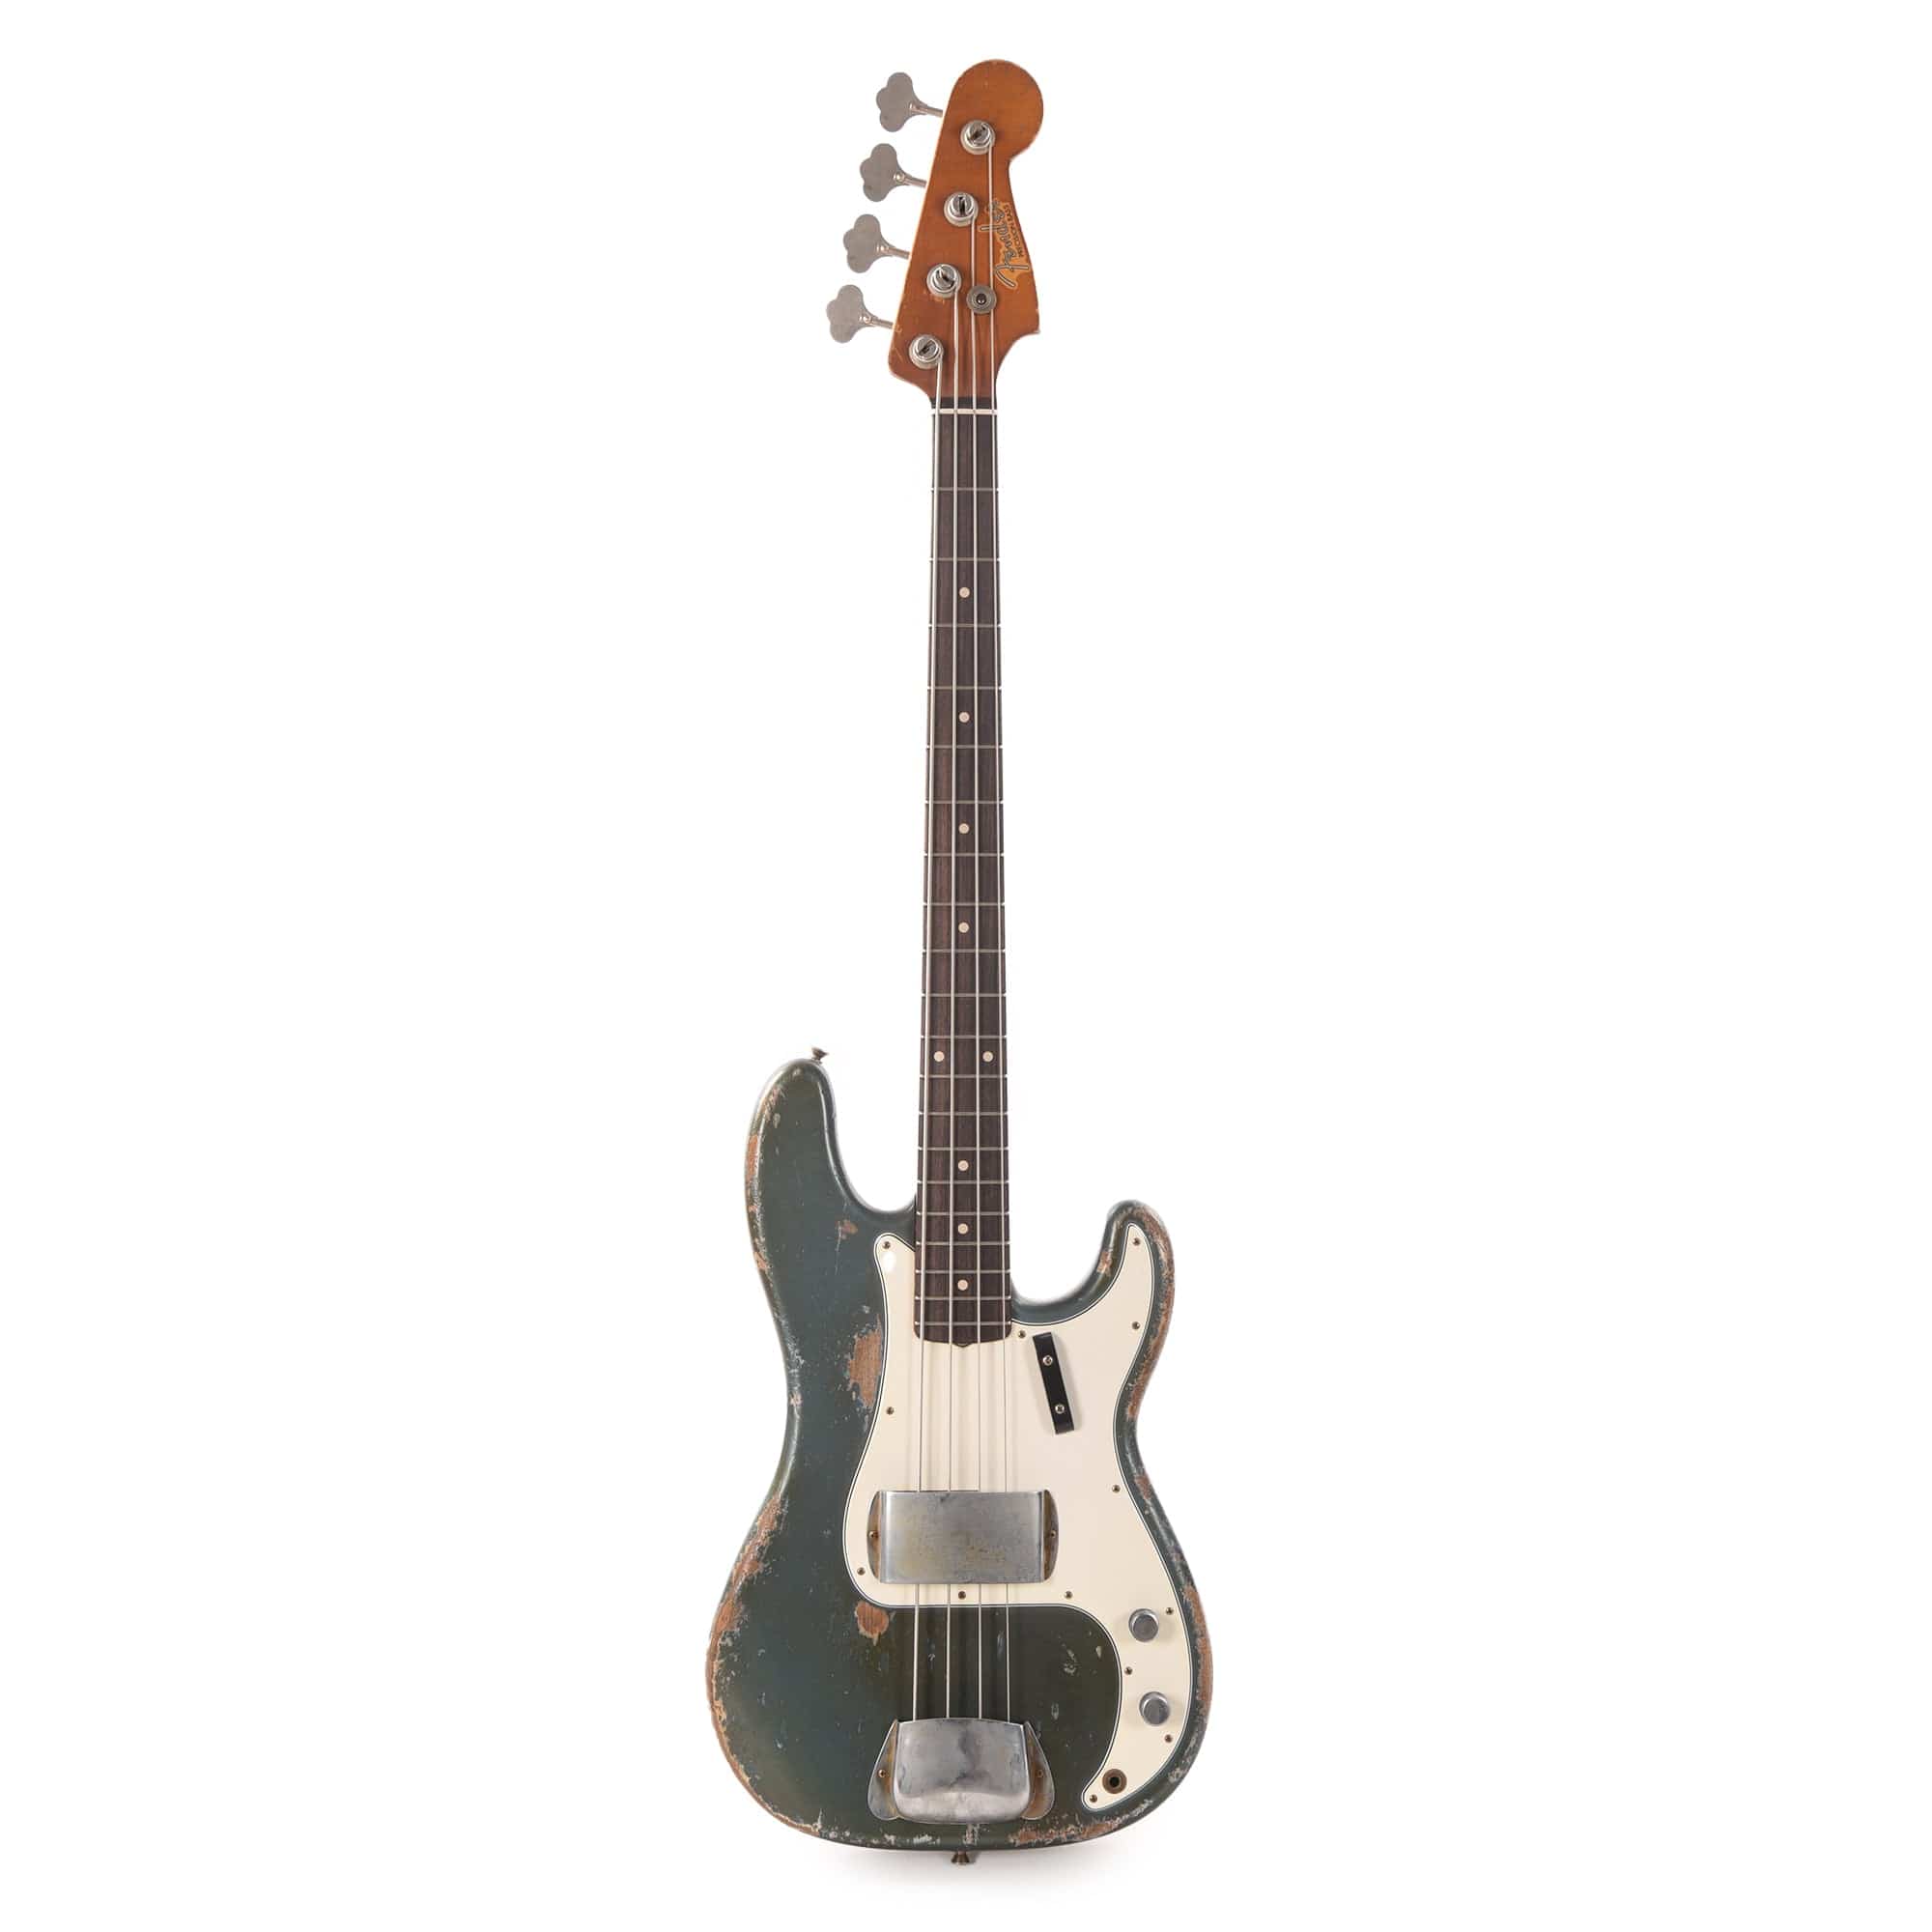 Fender Custom Shop 1962 Precision Bass Heavy Relic Heavy Aged Nicotine Lake Placid Blue Master Built by Vincent Van Trigt Bass Guitars / 4-String